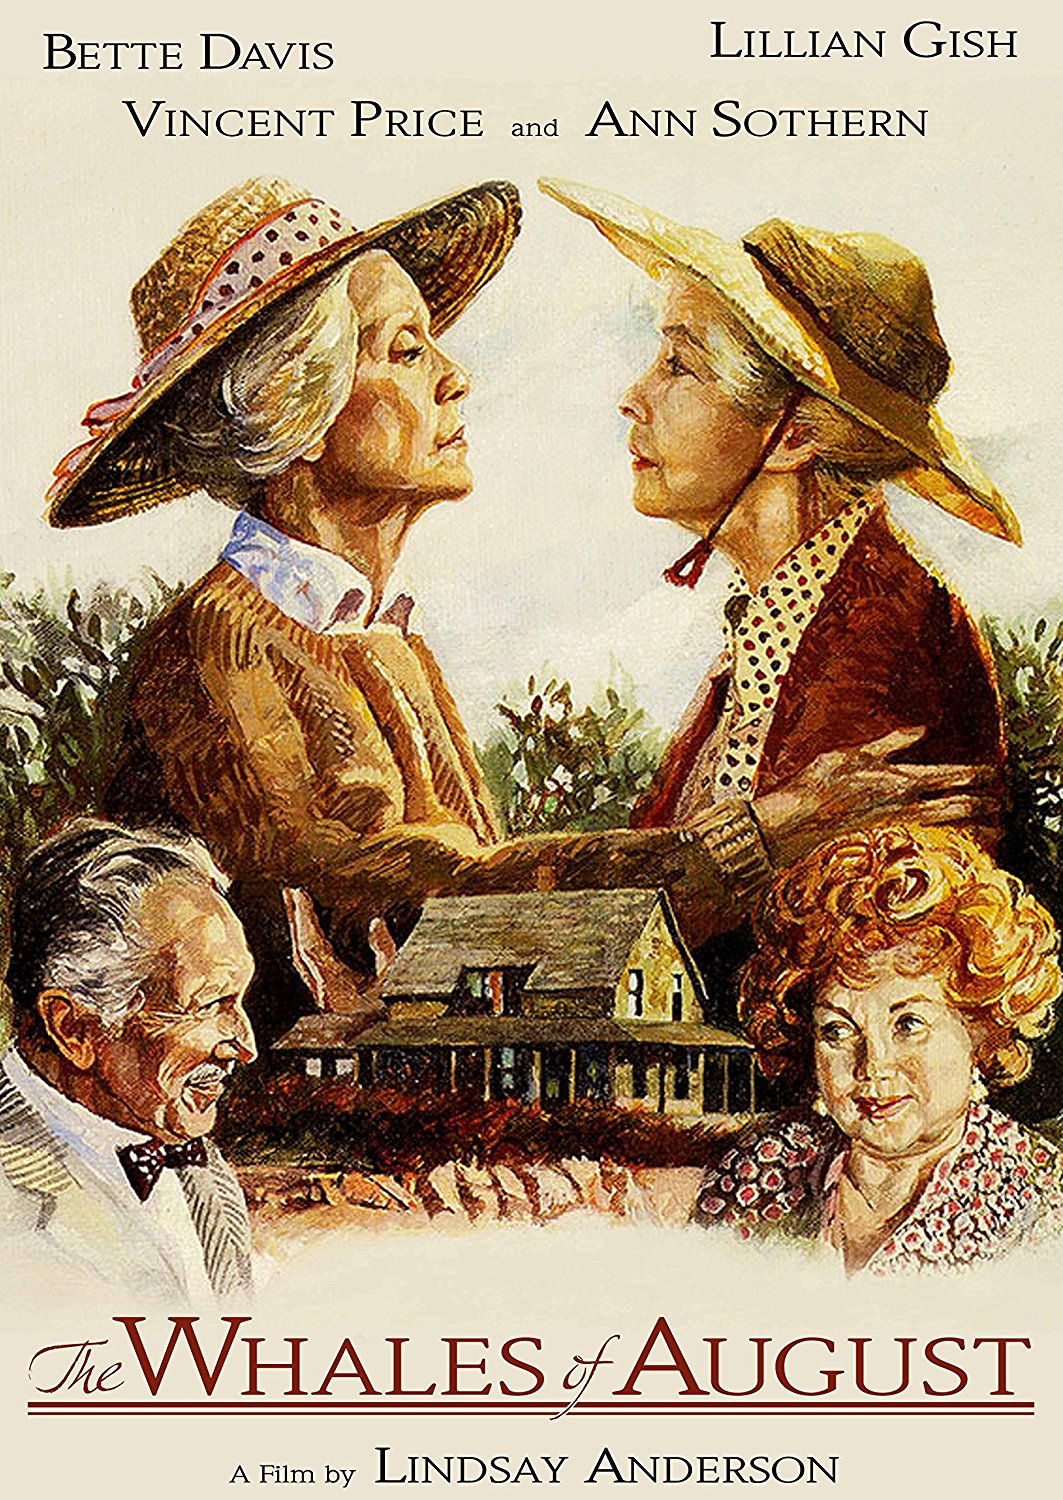 The Whales of August (1987) starring Lillian Gish, Bette Davis, Vincent Price, Ann Sothern